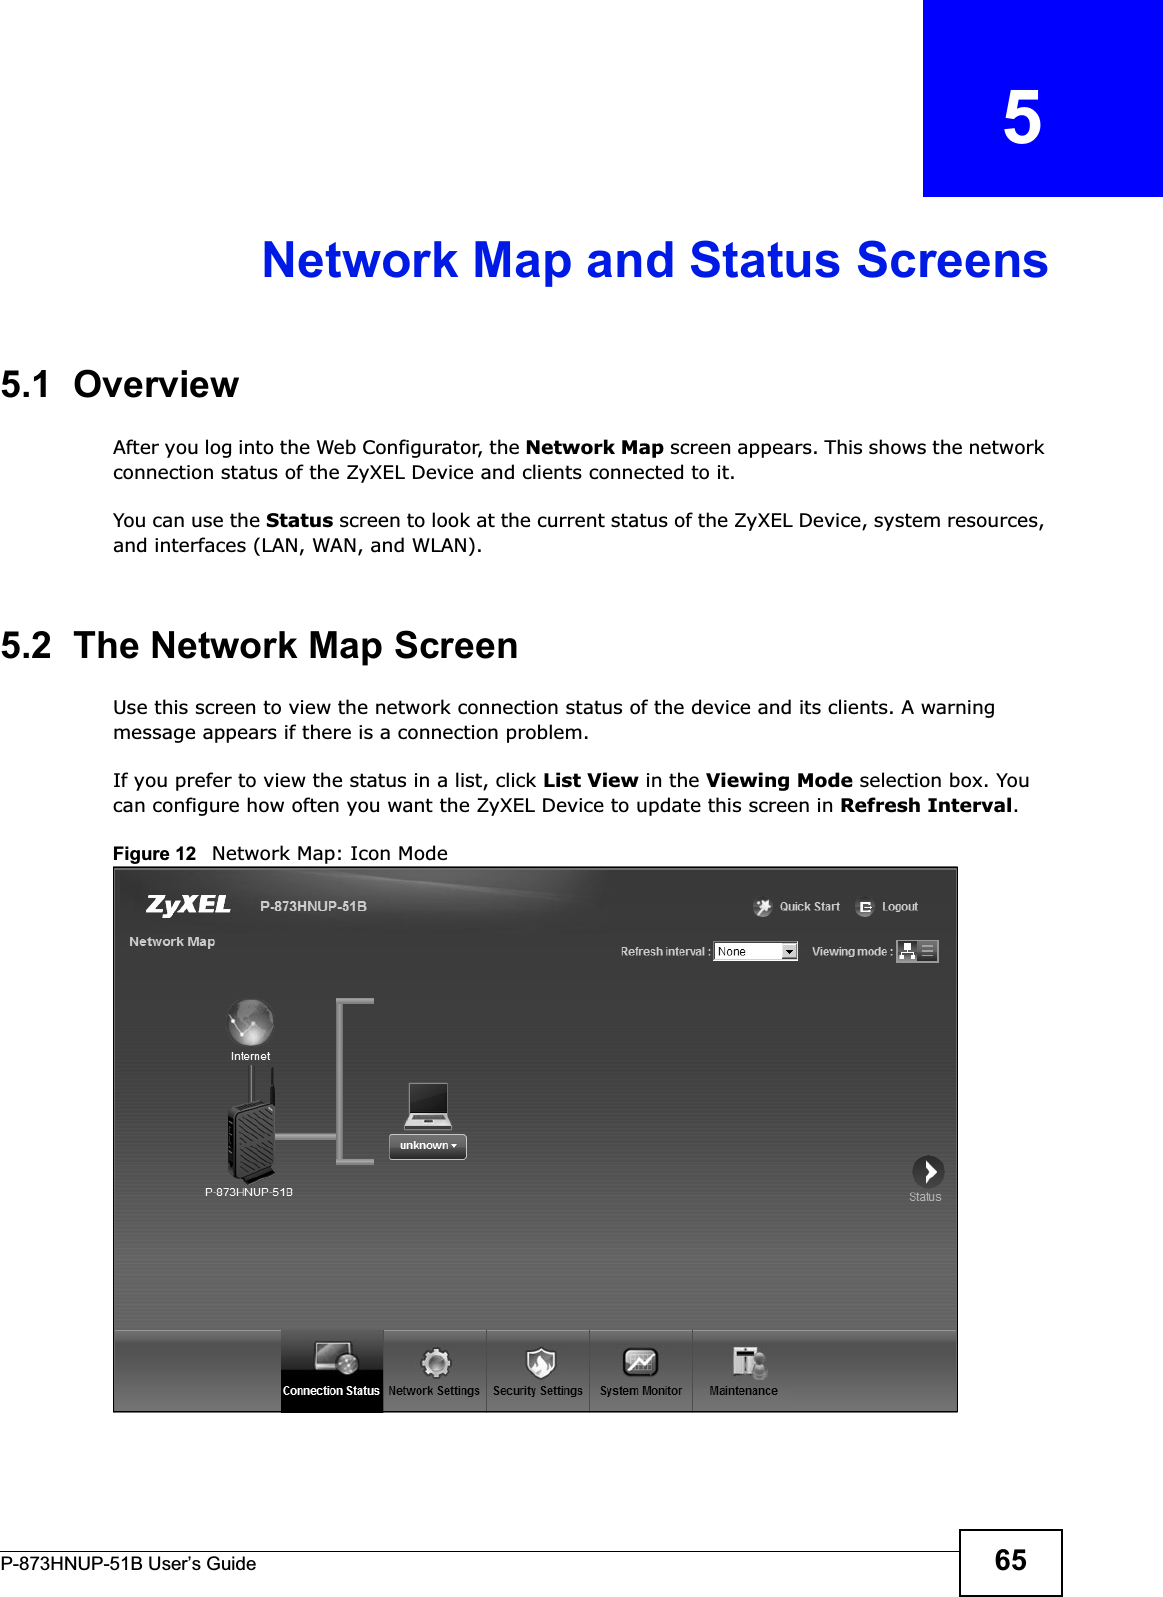 P-873HNUP-51B User’s Guide 65CHAPTER   5Network Map and Status Screens5.1  OverviewAfter you log into the Web Configurator, the Network Map screen appears. This shows the network connection status of the ZyXEL Device and clients connected to it. You can use the Status screen to look at the current status of the ZyXEL Device, system resources, and interfaces (LAN, WAN, and WLAN). 5.2  The Network Map ScreenUse this screen to view the network connection status of the device and its clients. A warning message appears if there is a connection problem. If you prefer to view the status in a list, click List View in the Viewing Mode selection box. You can configure how often you want the ZyXEL Device to update this screen in Refresh Interval.Figure 12   Network Map: Icon Mode 